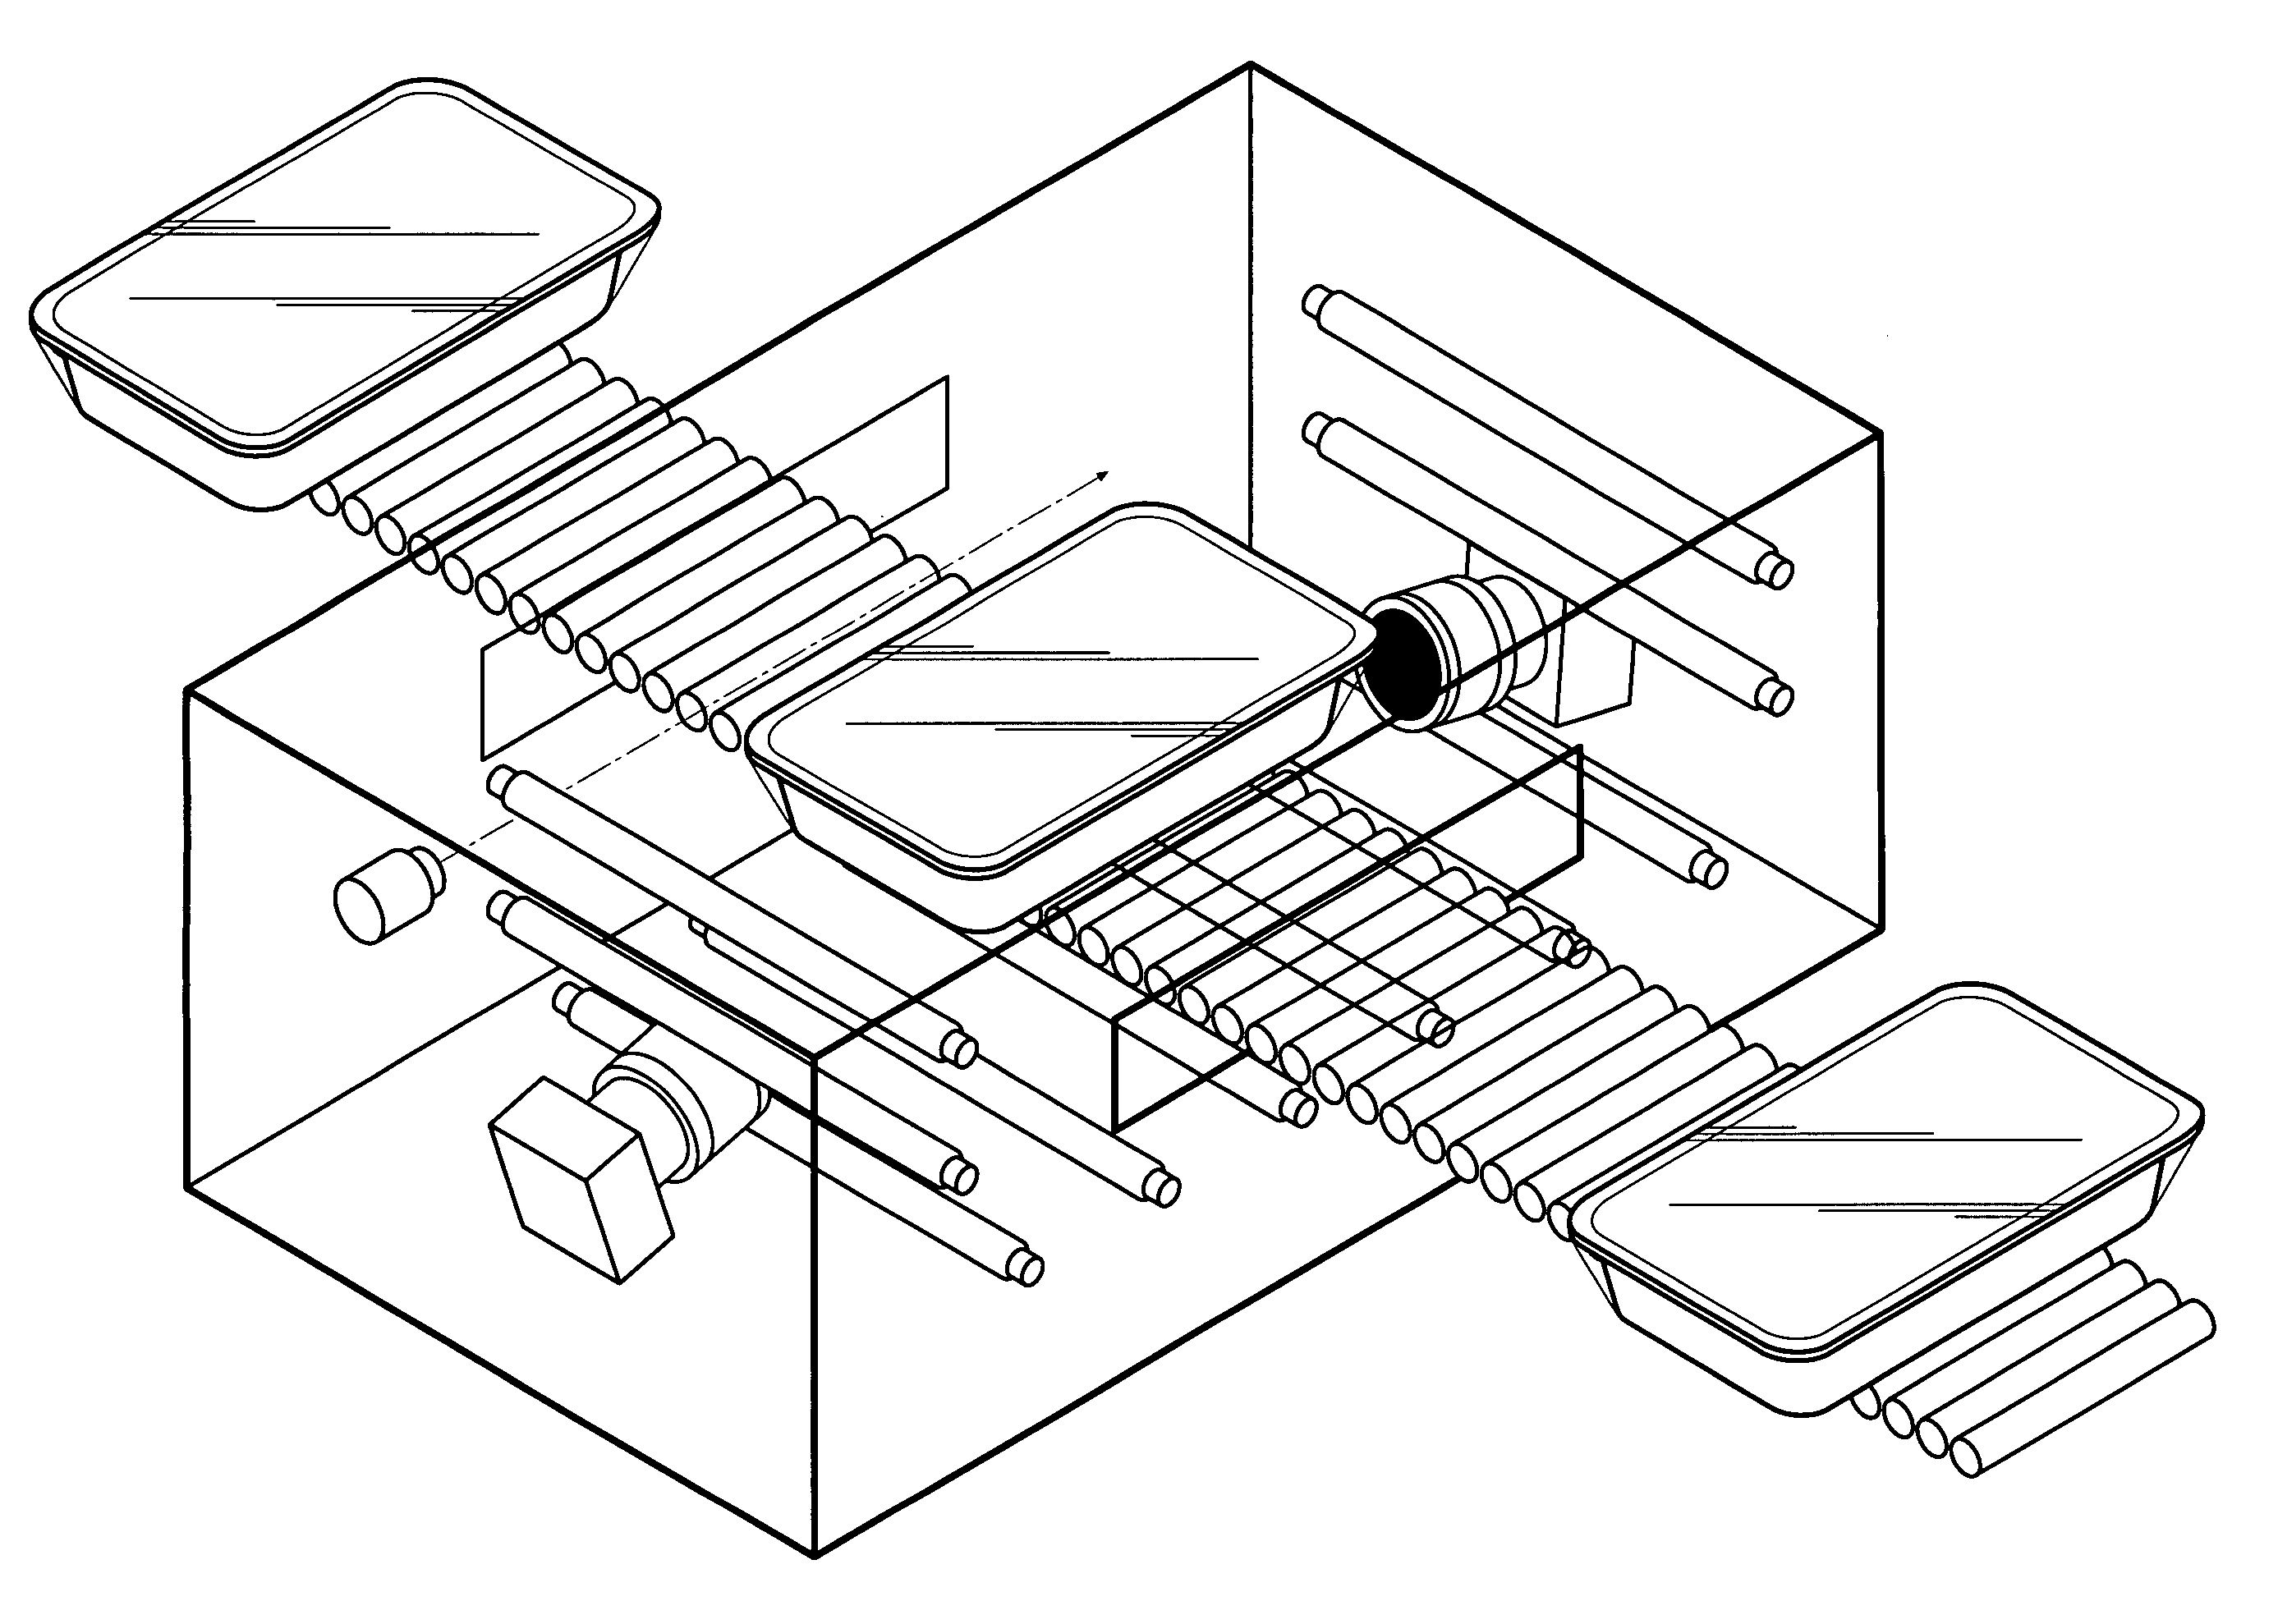 System and method for inspecting packaging quality of a packaged food product